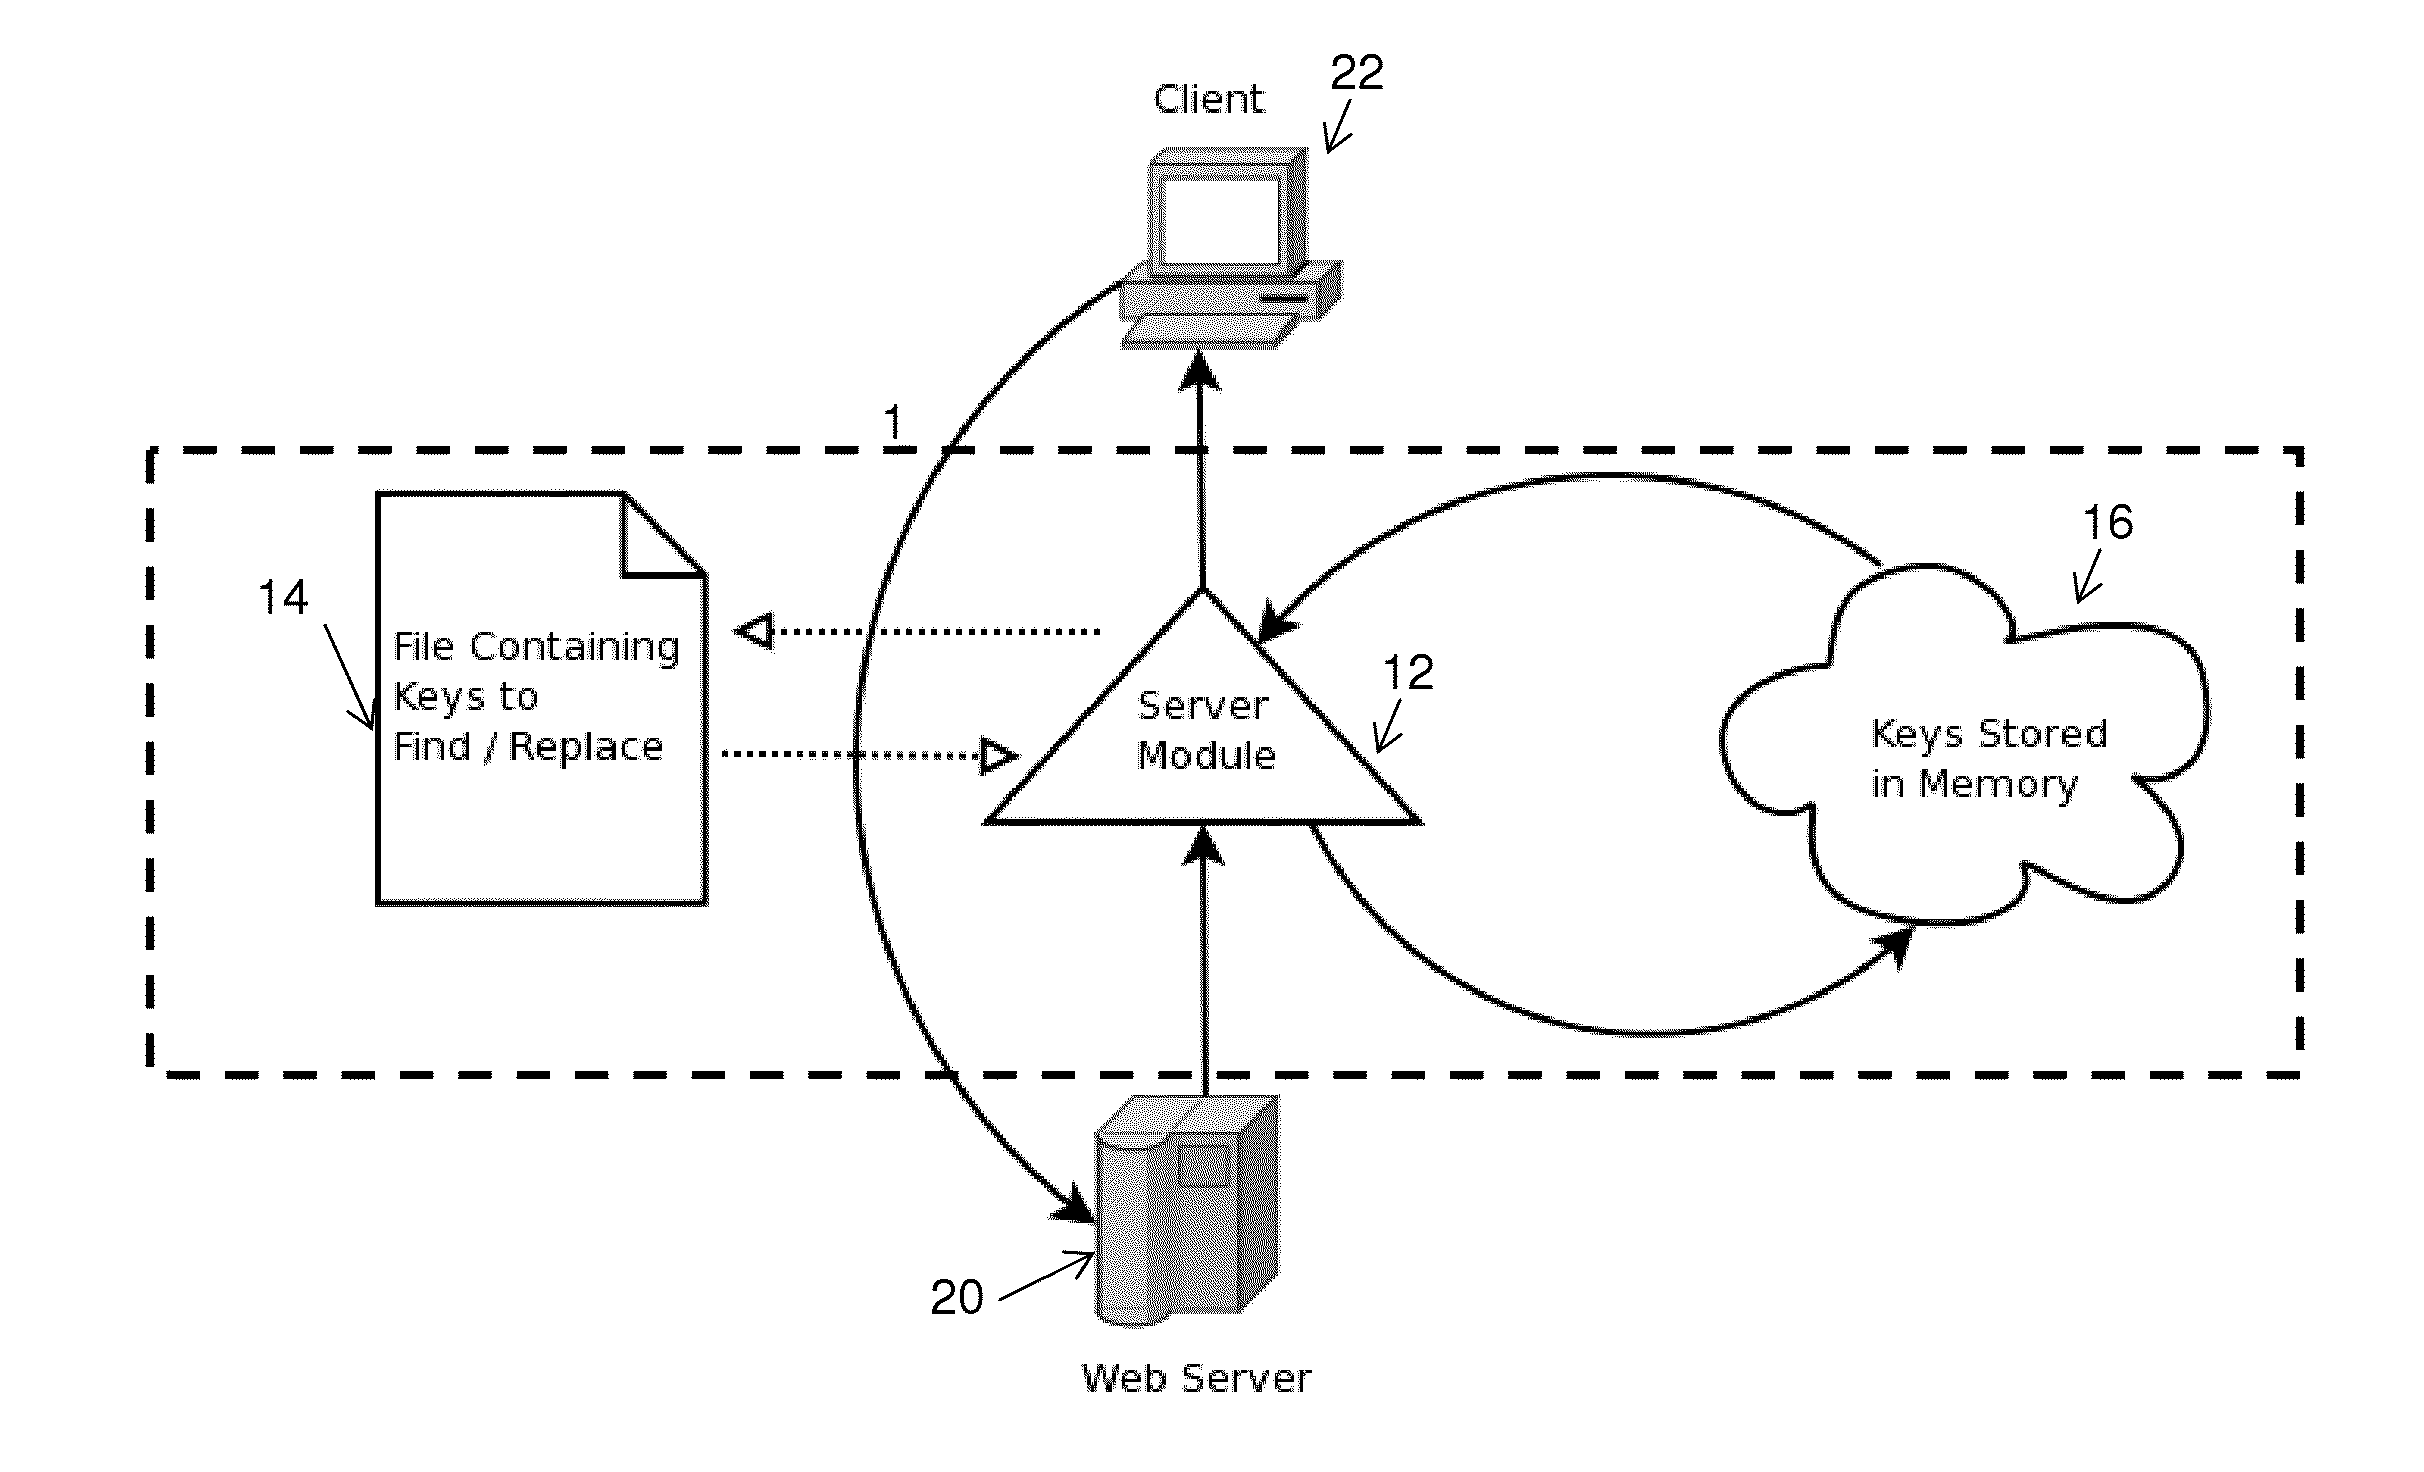 Apparatus and Method for Preventing Information from Being Extracted from a Webpage